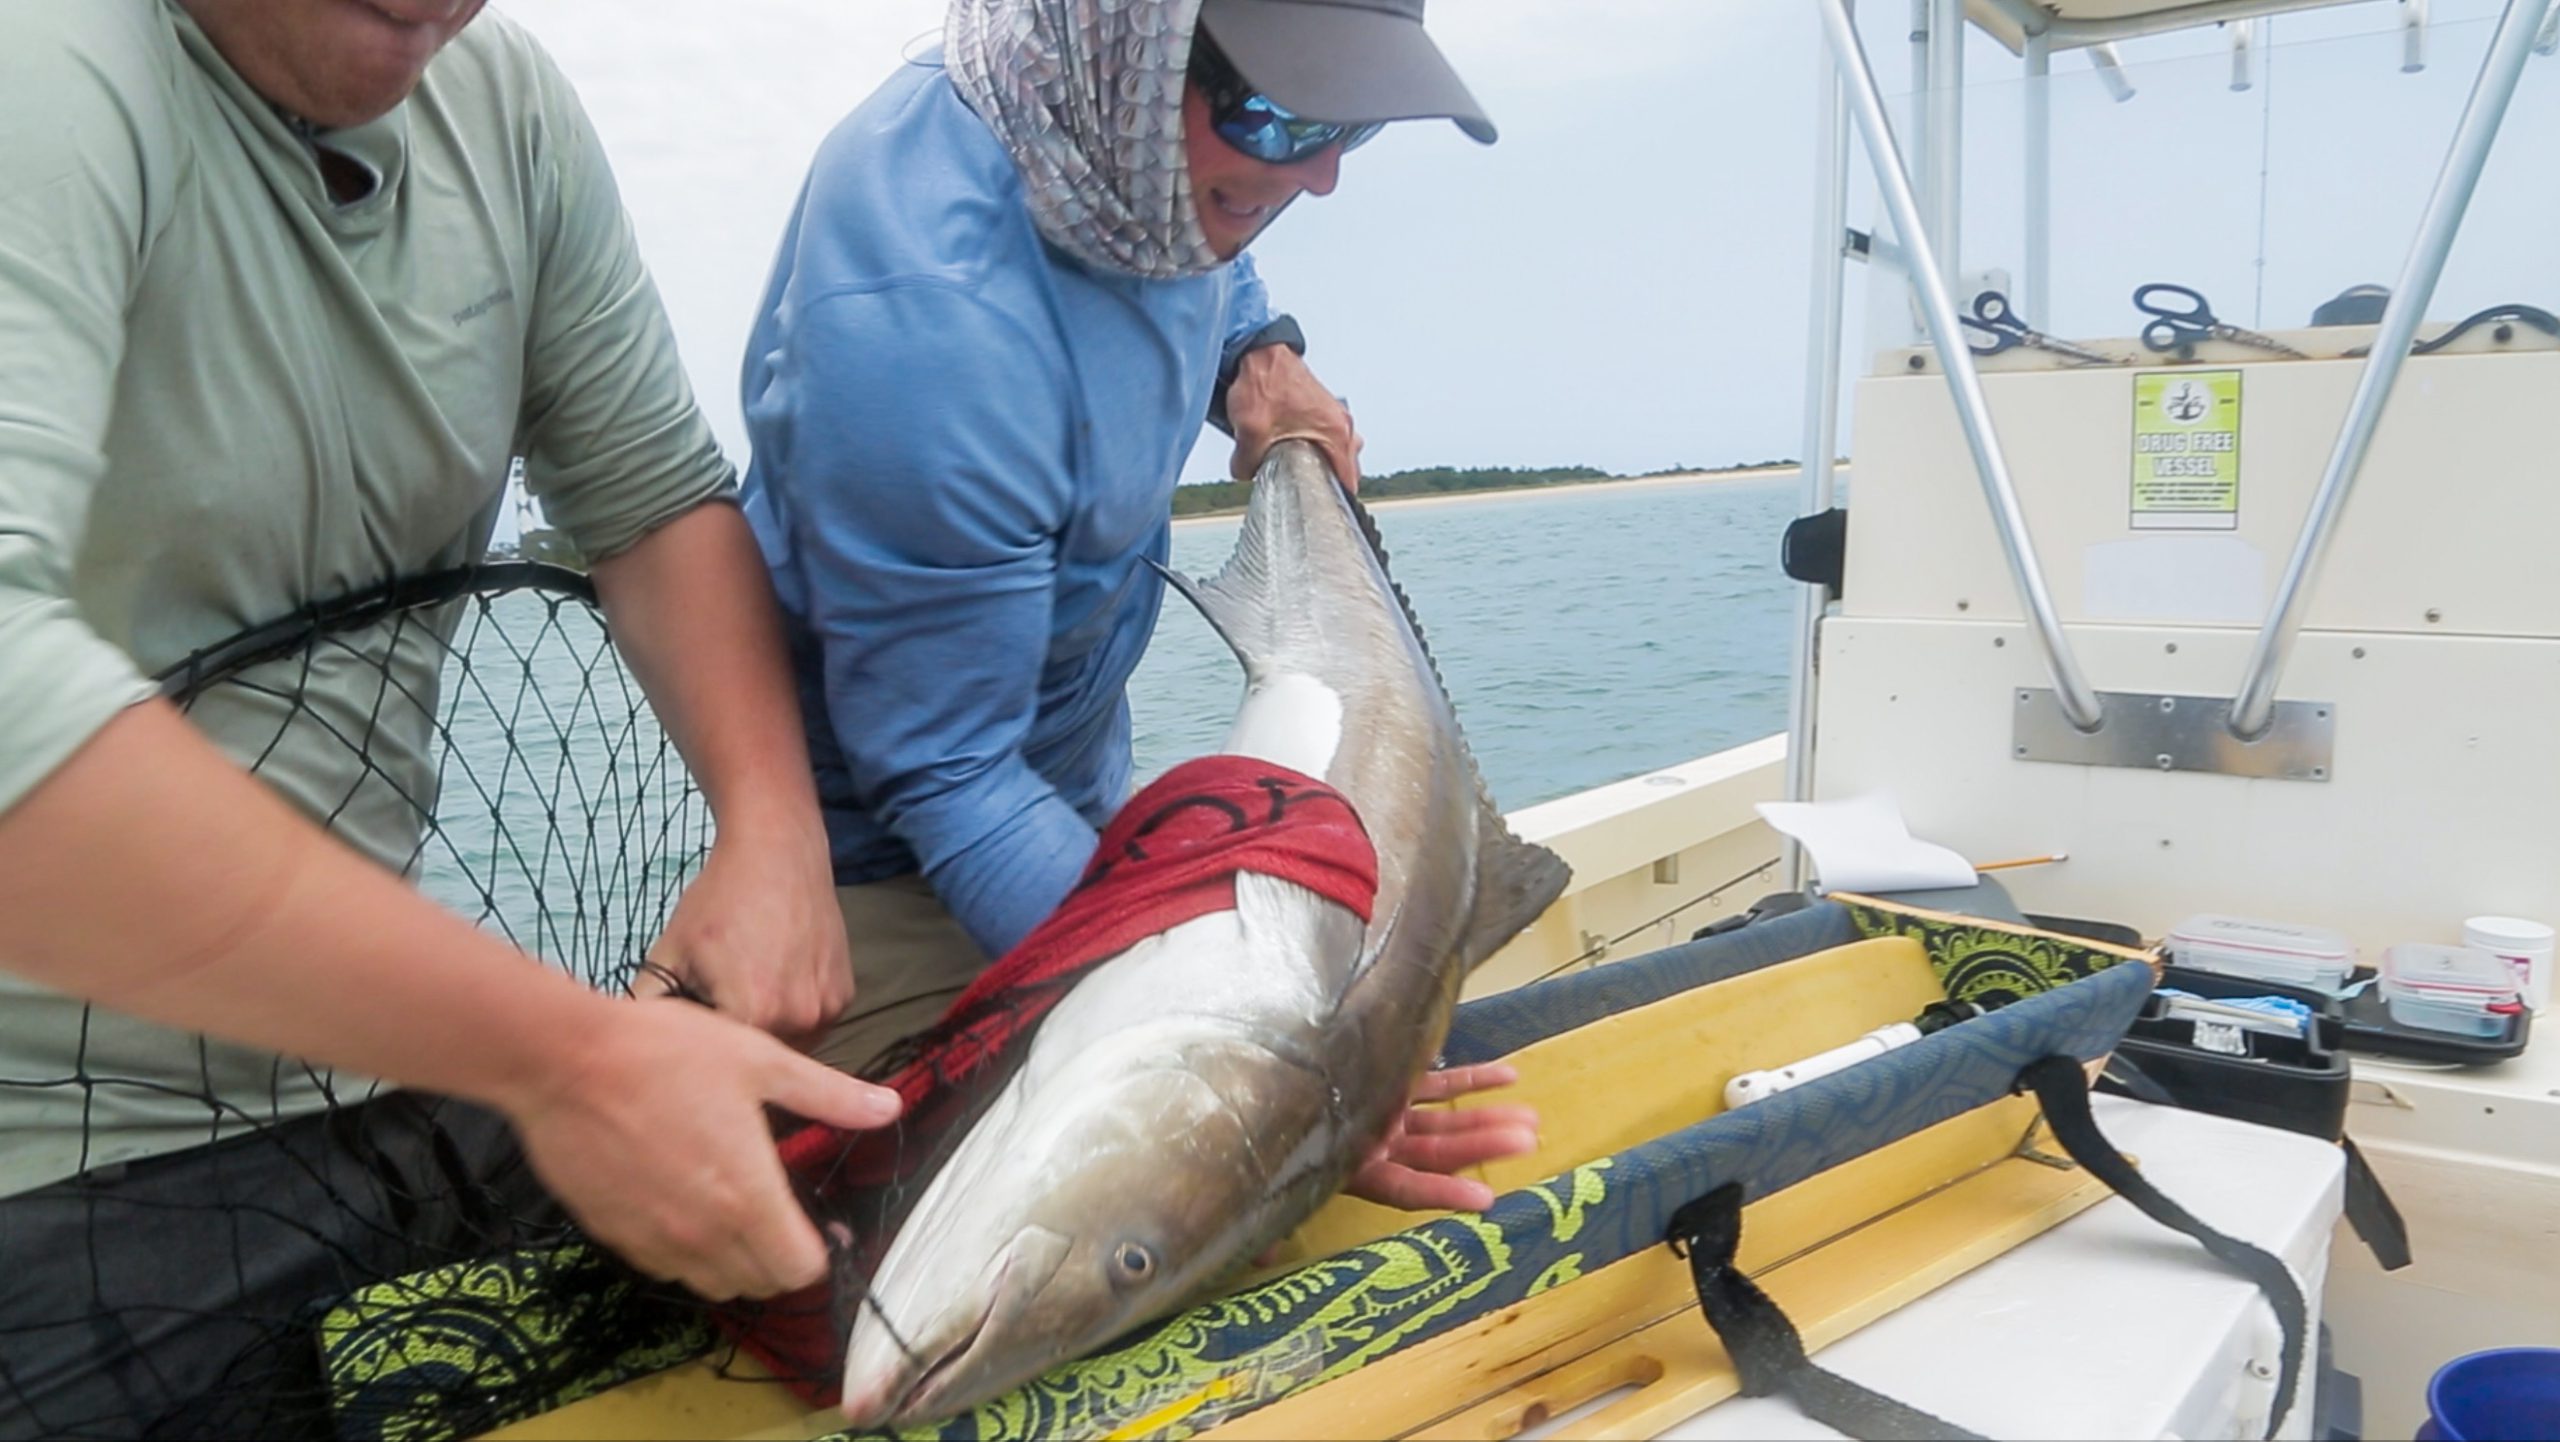 Global Change Fellow, Riley Gallagher, catches fish to study along the coast of North Carolina.